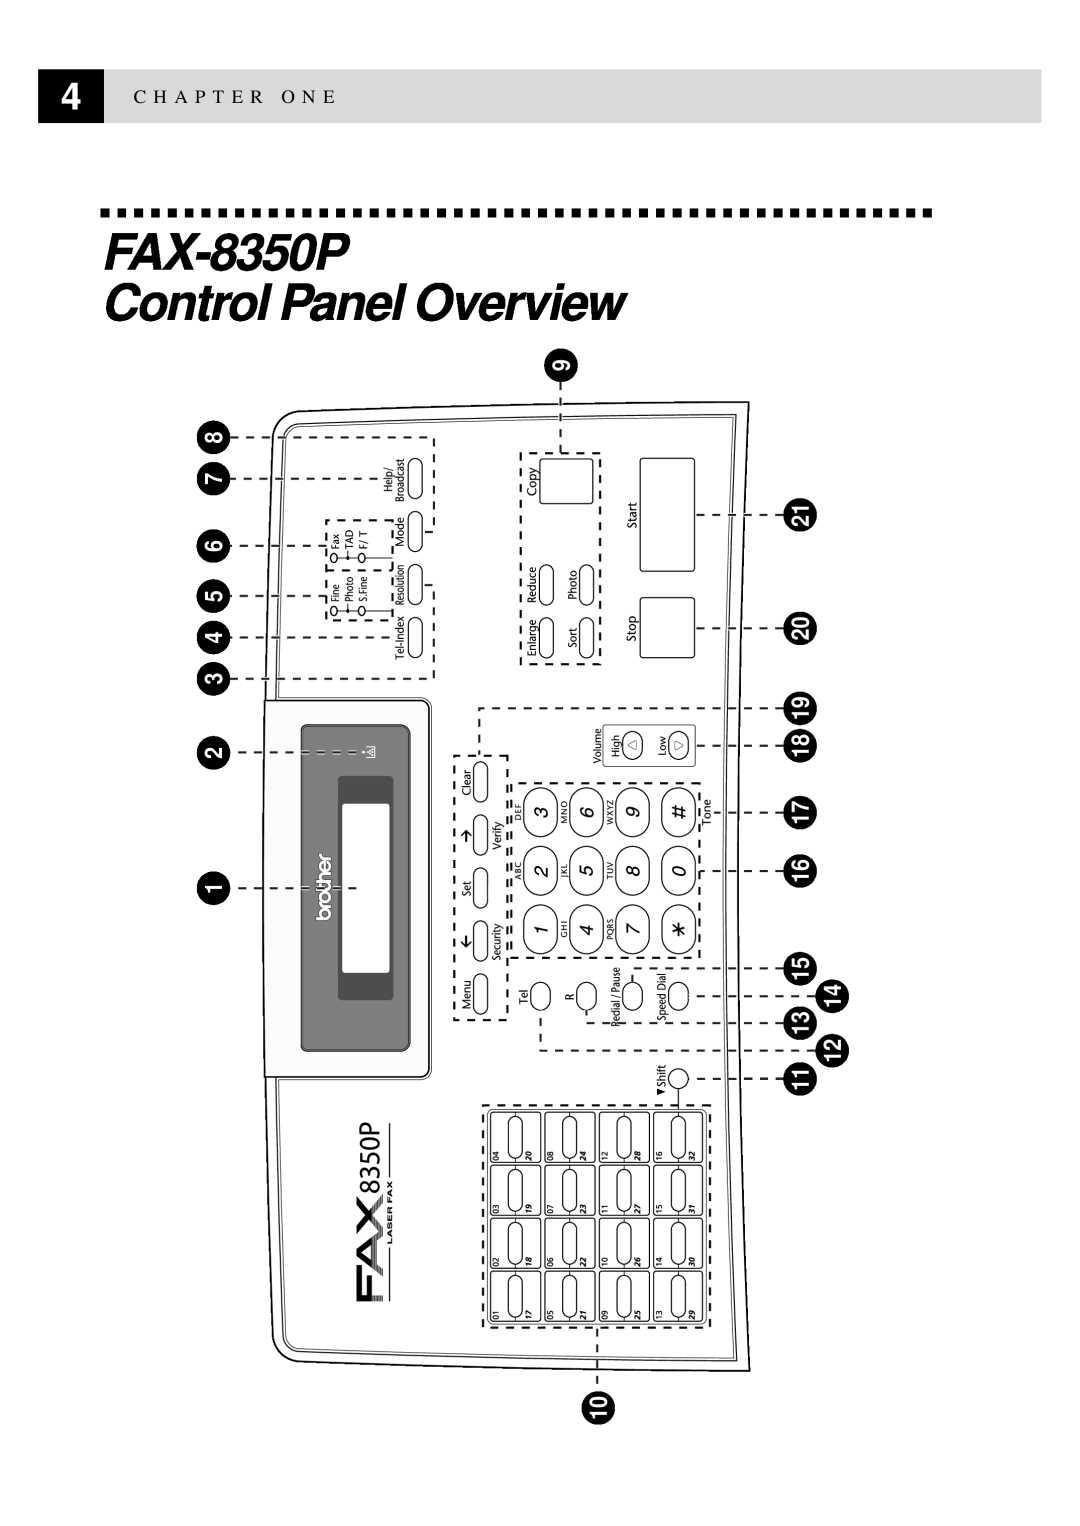 Brother MFC-9650 FAX-8350P Control Panel Overview, 11 13 15 16 17 18 19 20 12, C H A P T E R O N E, 2 3 4 5 6 7 